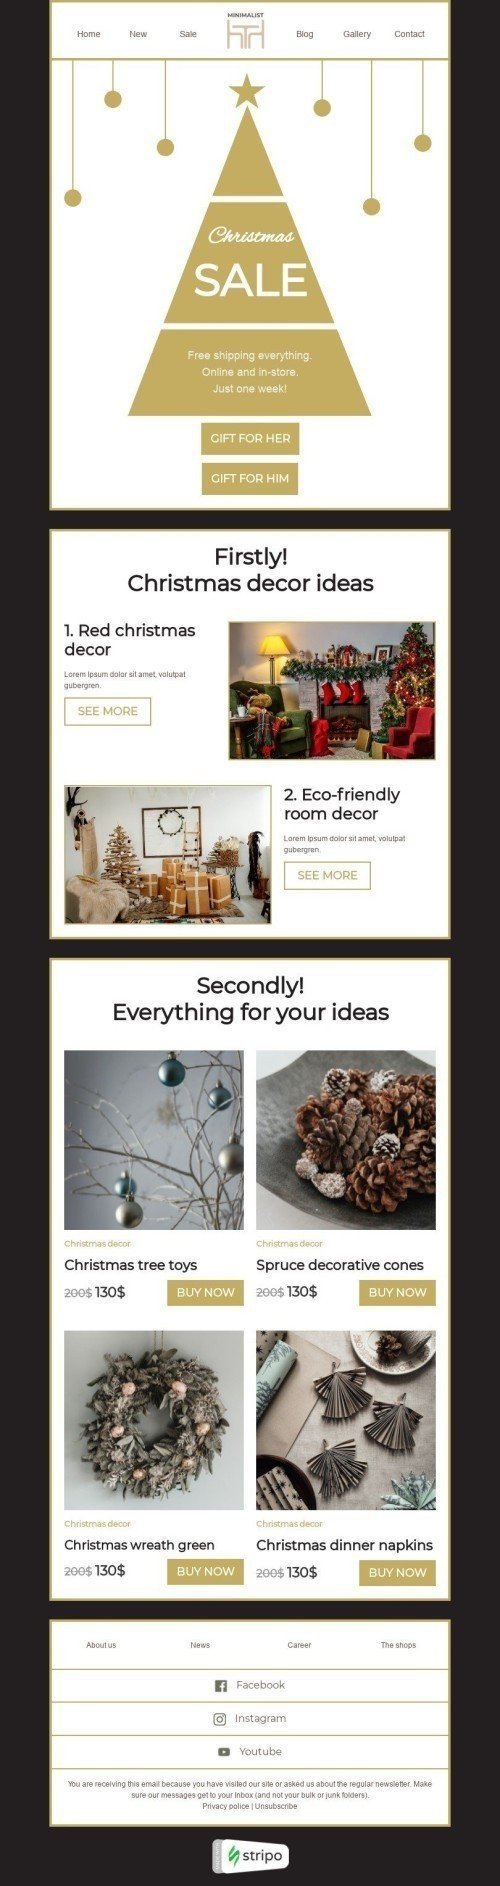 Christmas Email Template "Christmas decor ideas" for Furniture, Interior & DIY industry desktop view